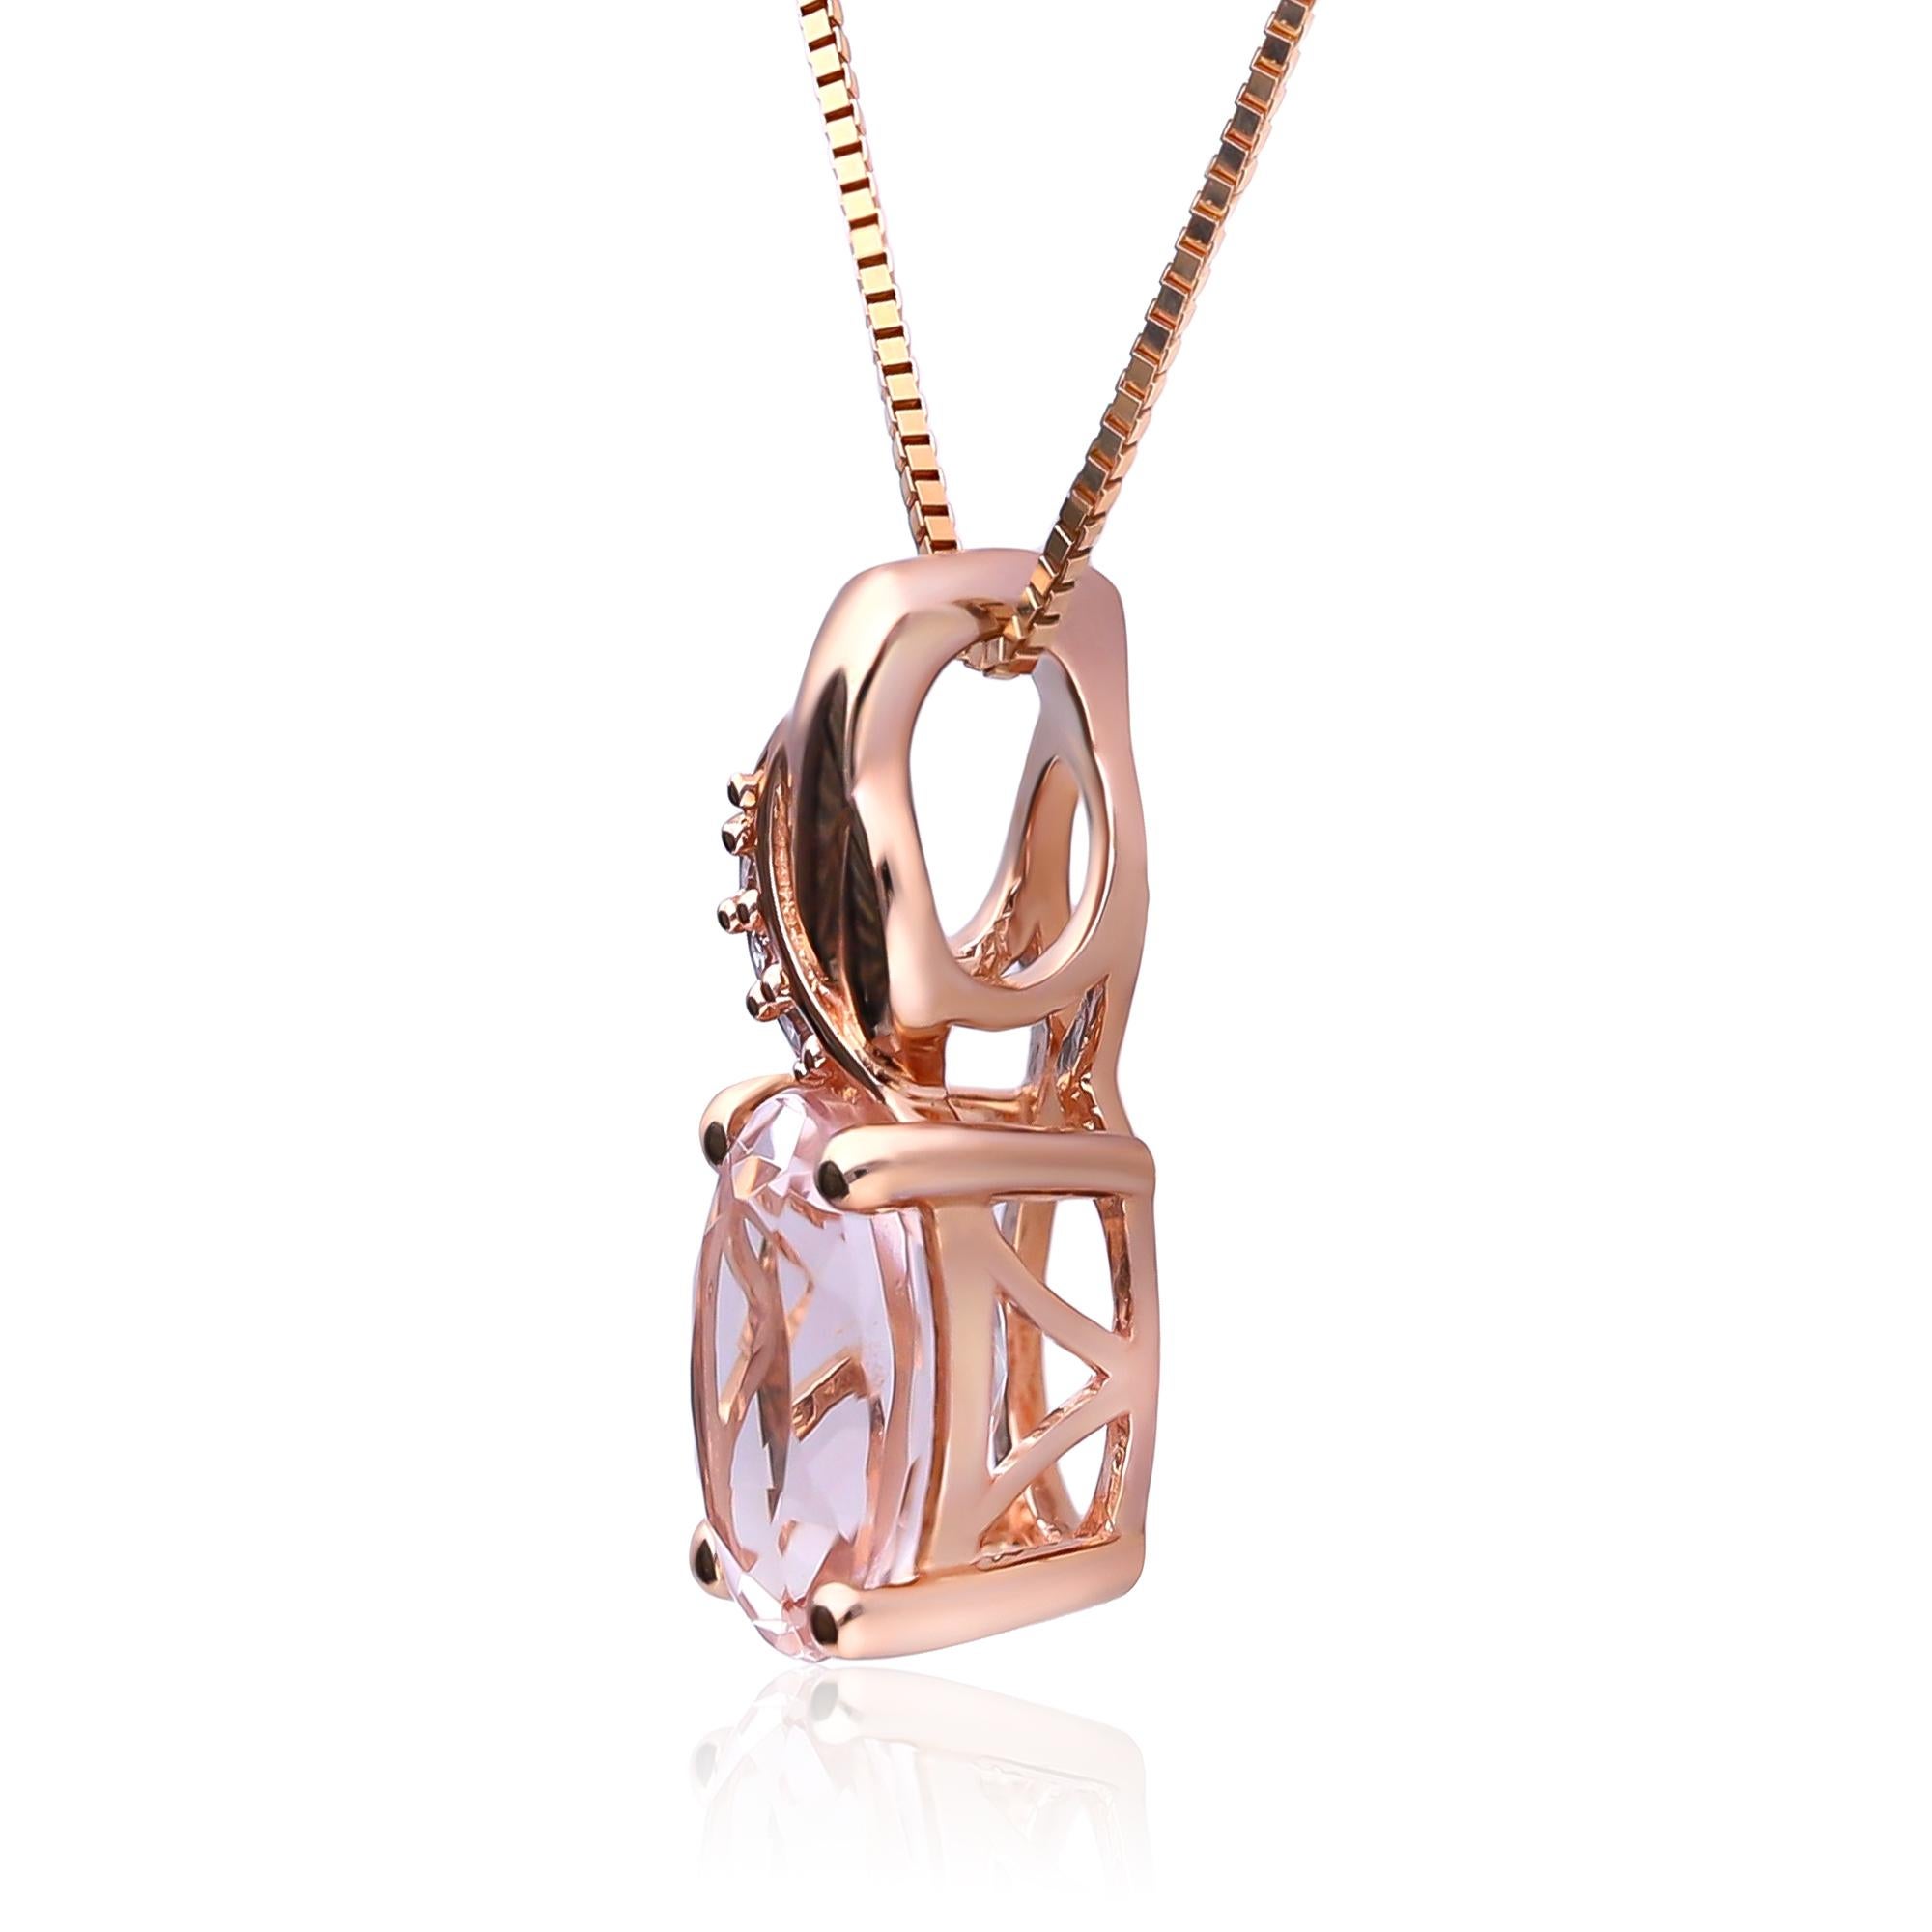 Decorate yourself in elegance with this Pendant is crafted from 10-karat Rose Gold by Gin & Grace Pendant. This Pendant is made up of 6X8 Oval-Cut Prong setting Genuine Morganite (1 Pcs) 1.25 Carat and Round-Cut Prong setting Natural White Diamond